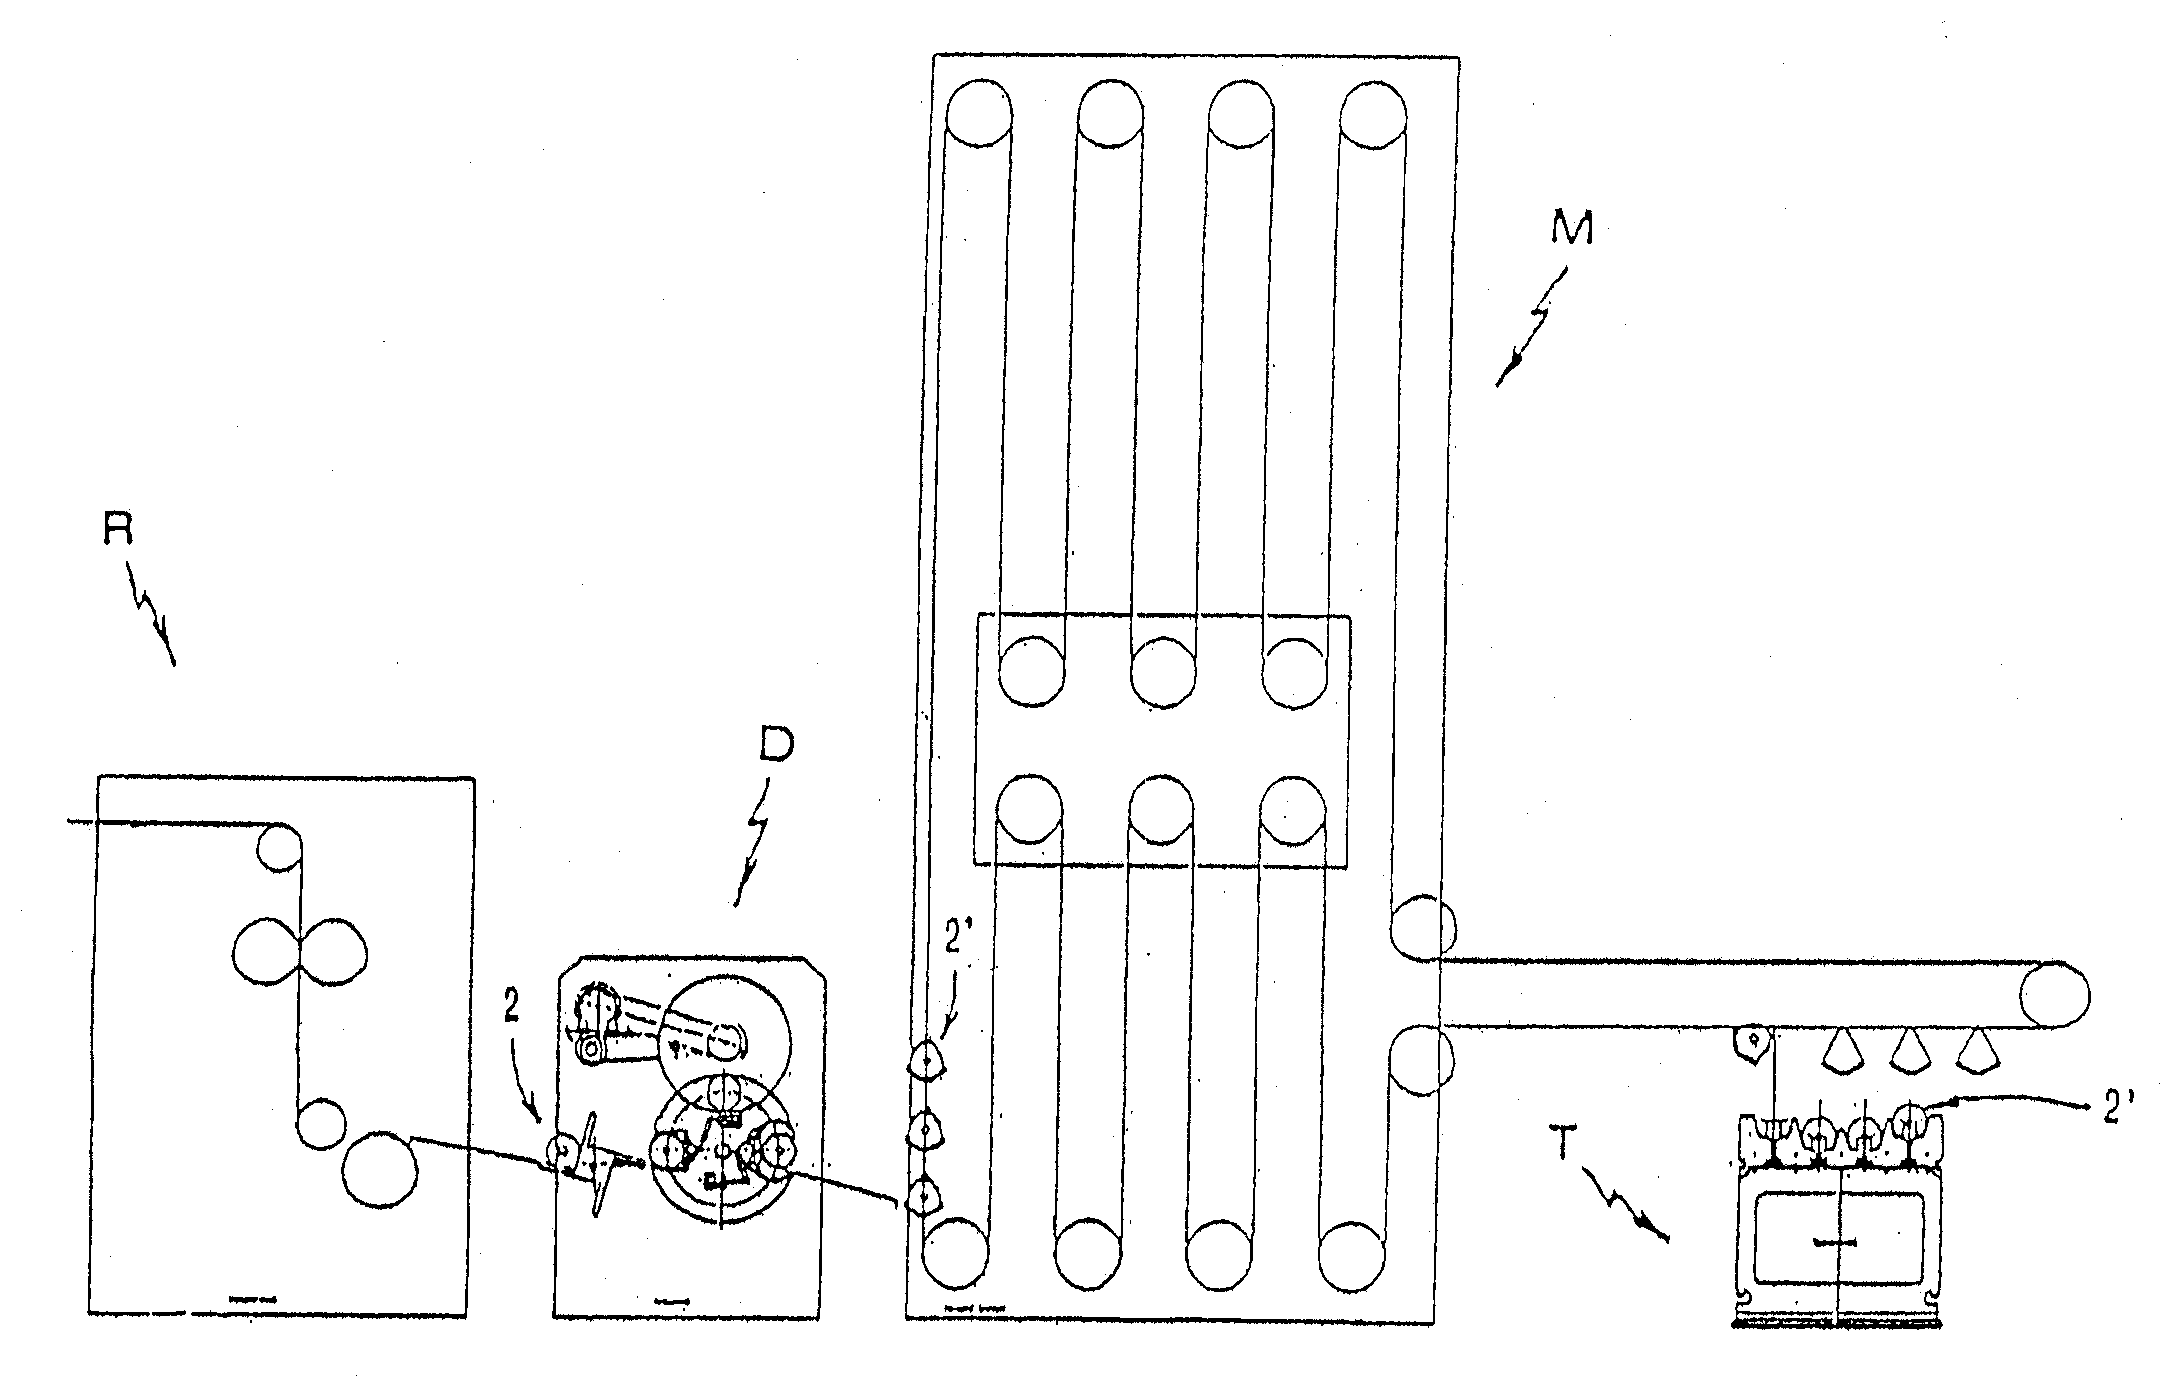 Apparatus for trimming paper rolls or logs and an operating method for treating the logs